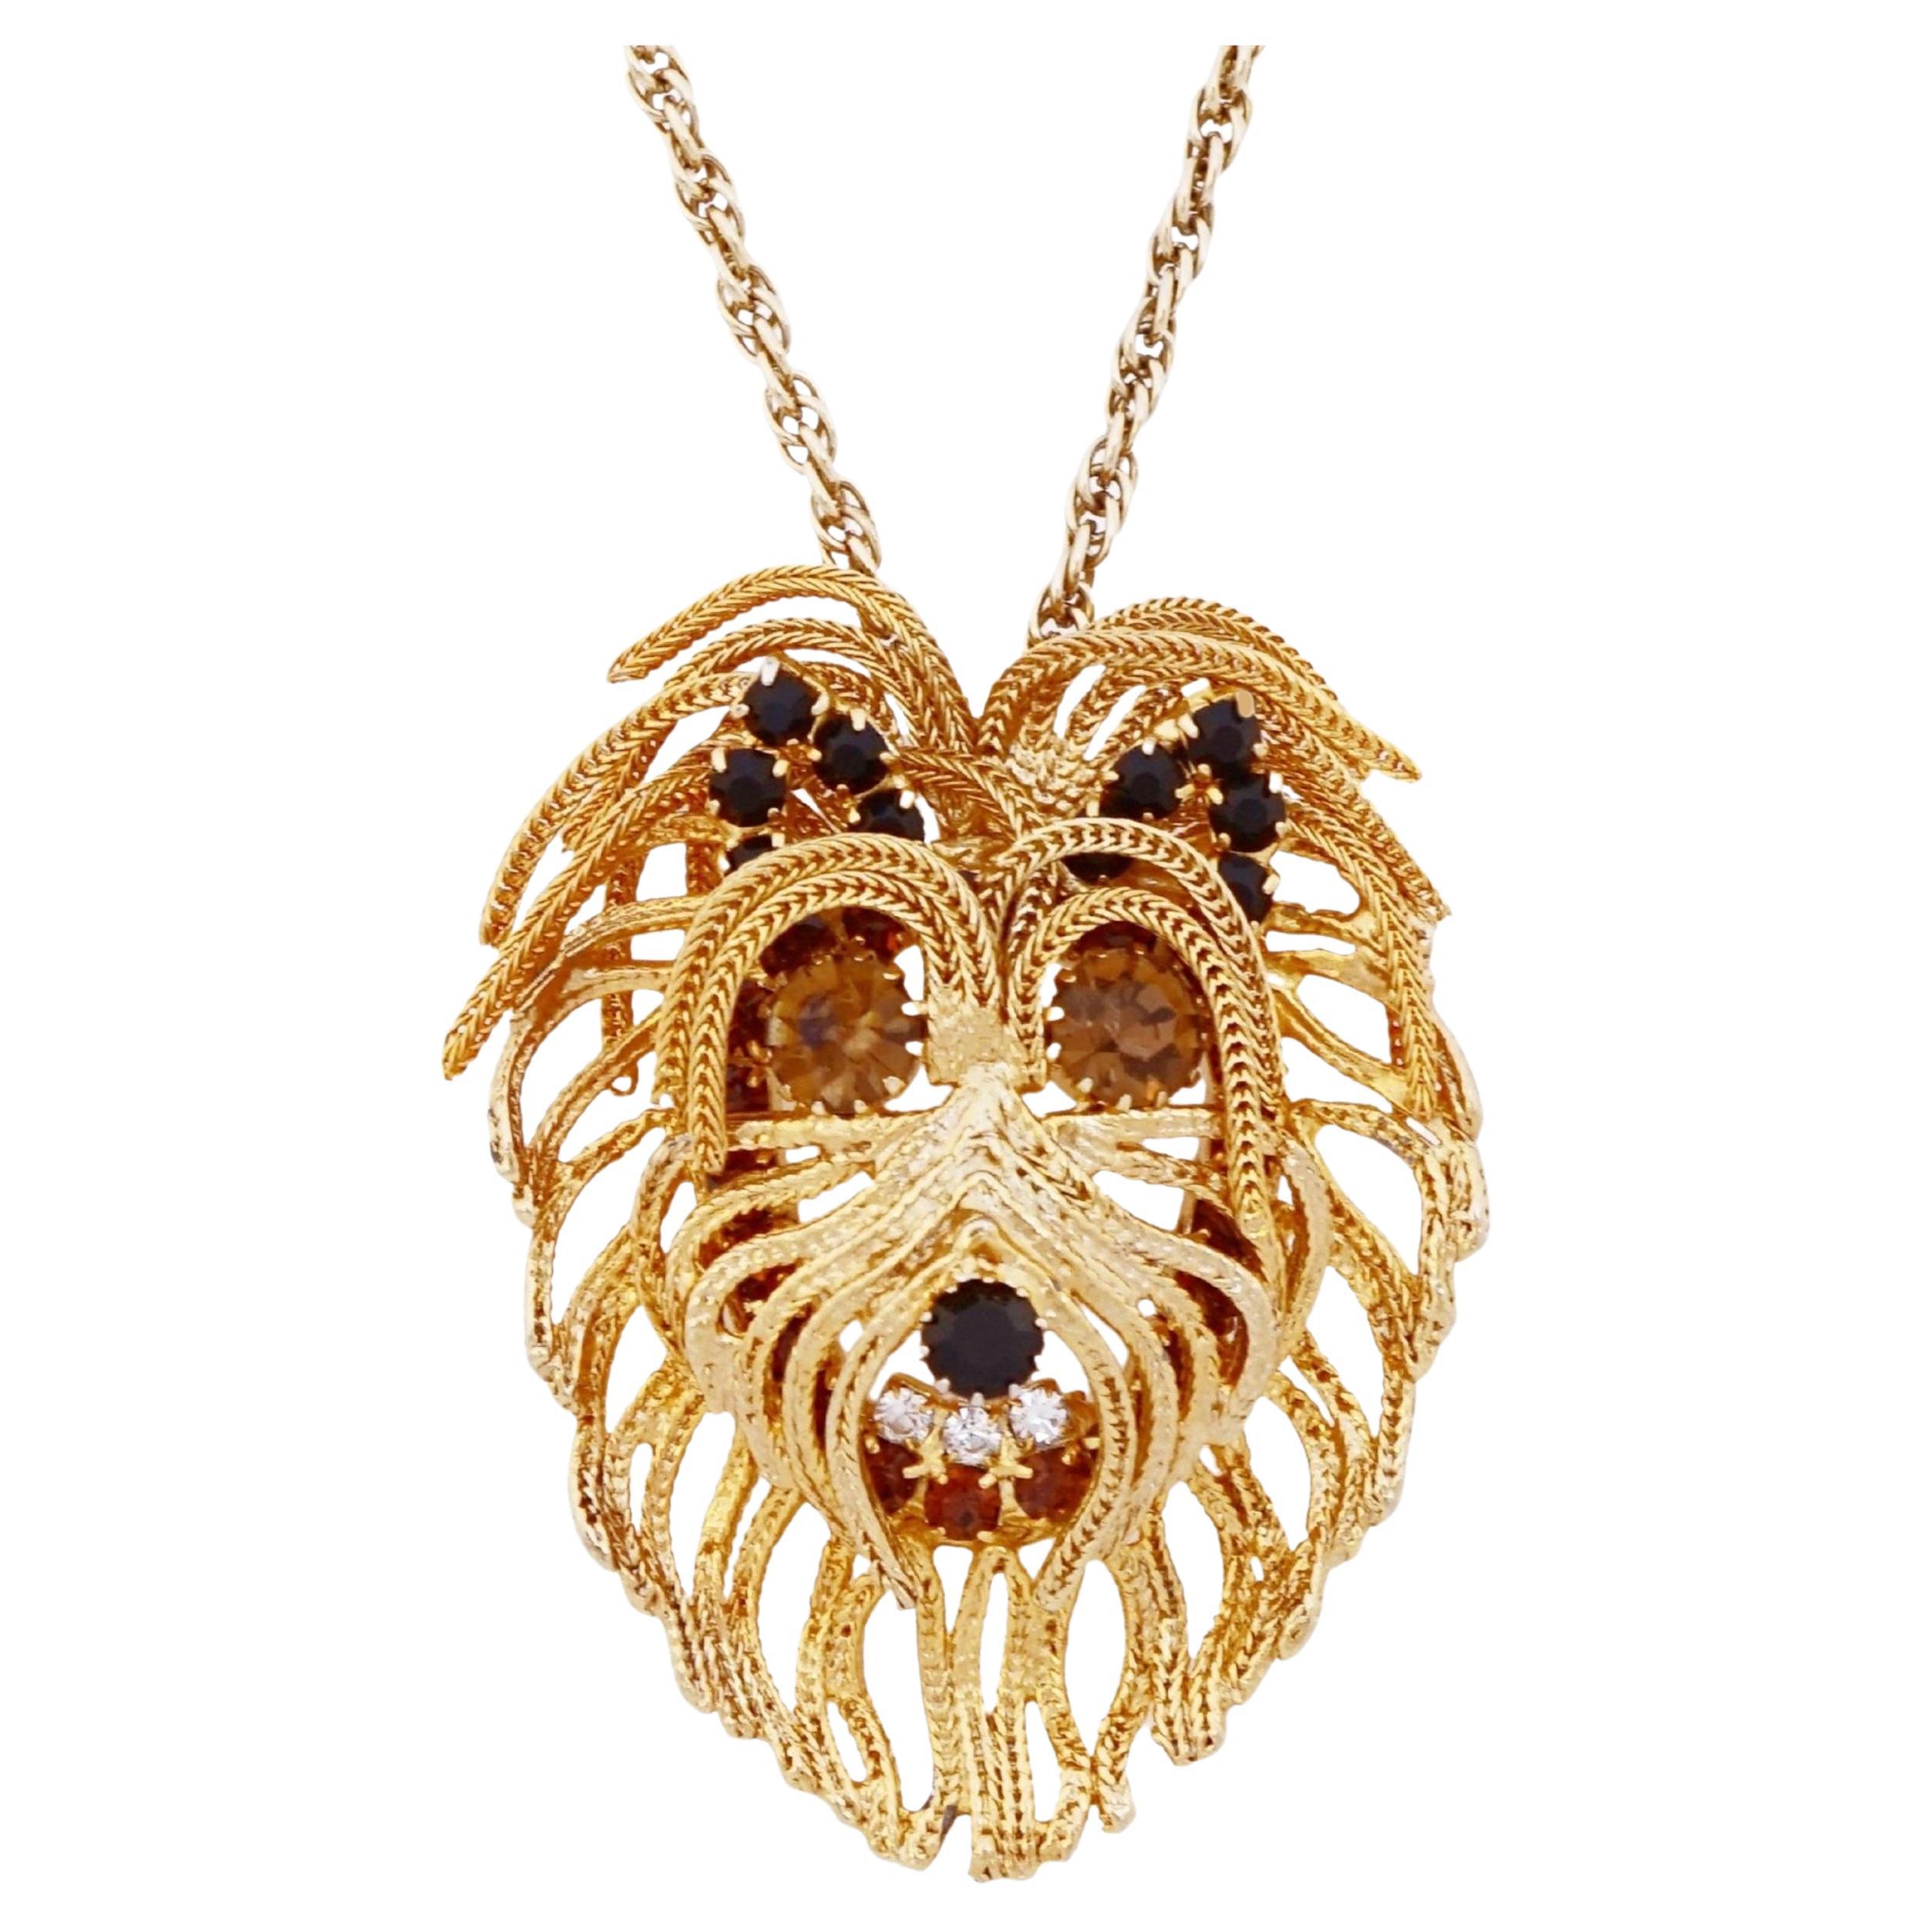 Gold Chain Shaggy Dog Pendant Necklace By Dominique, 1960s For Sale